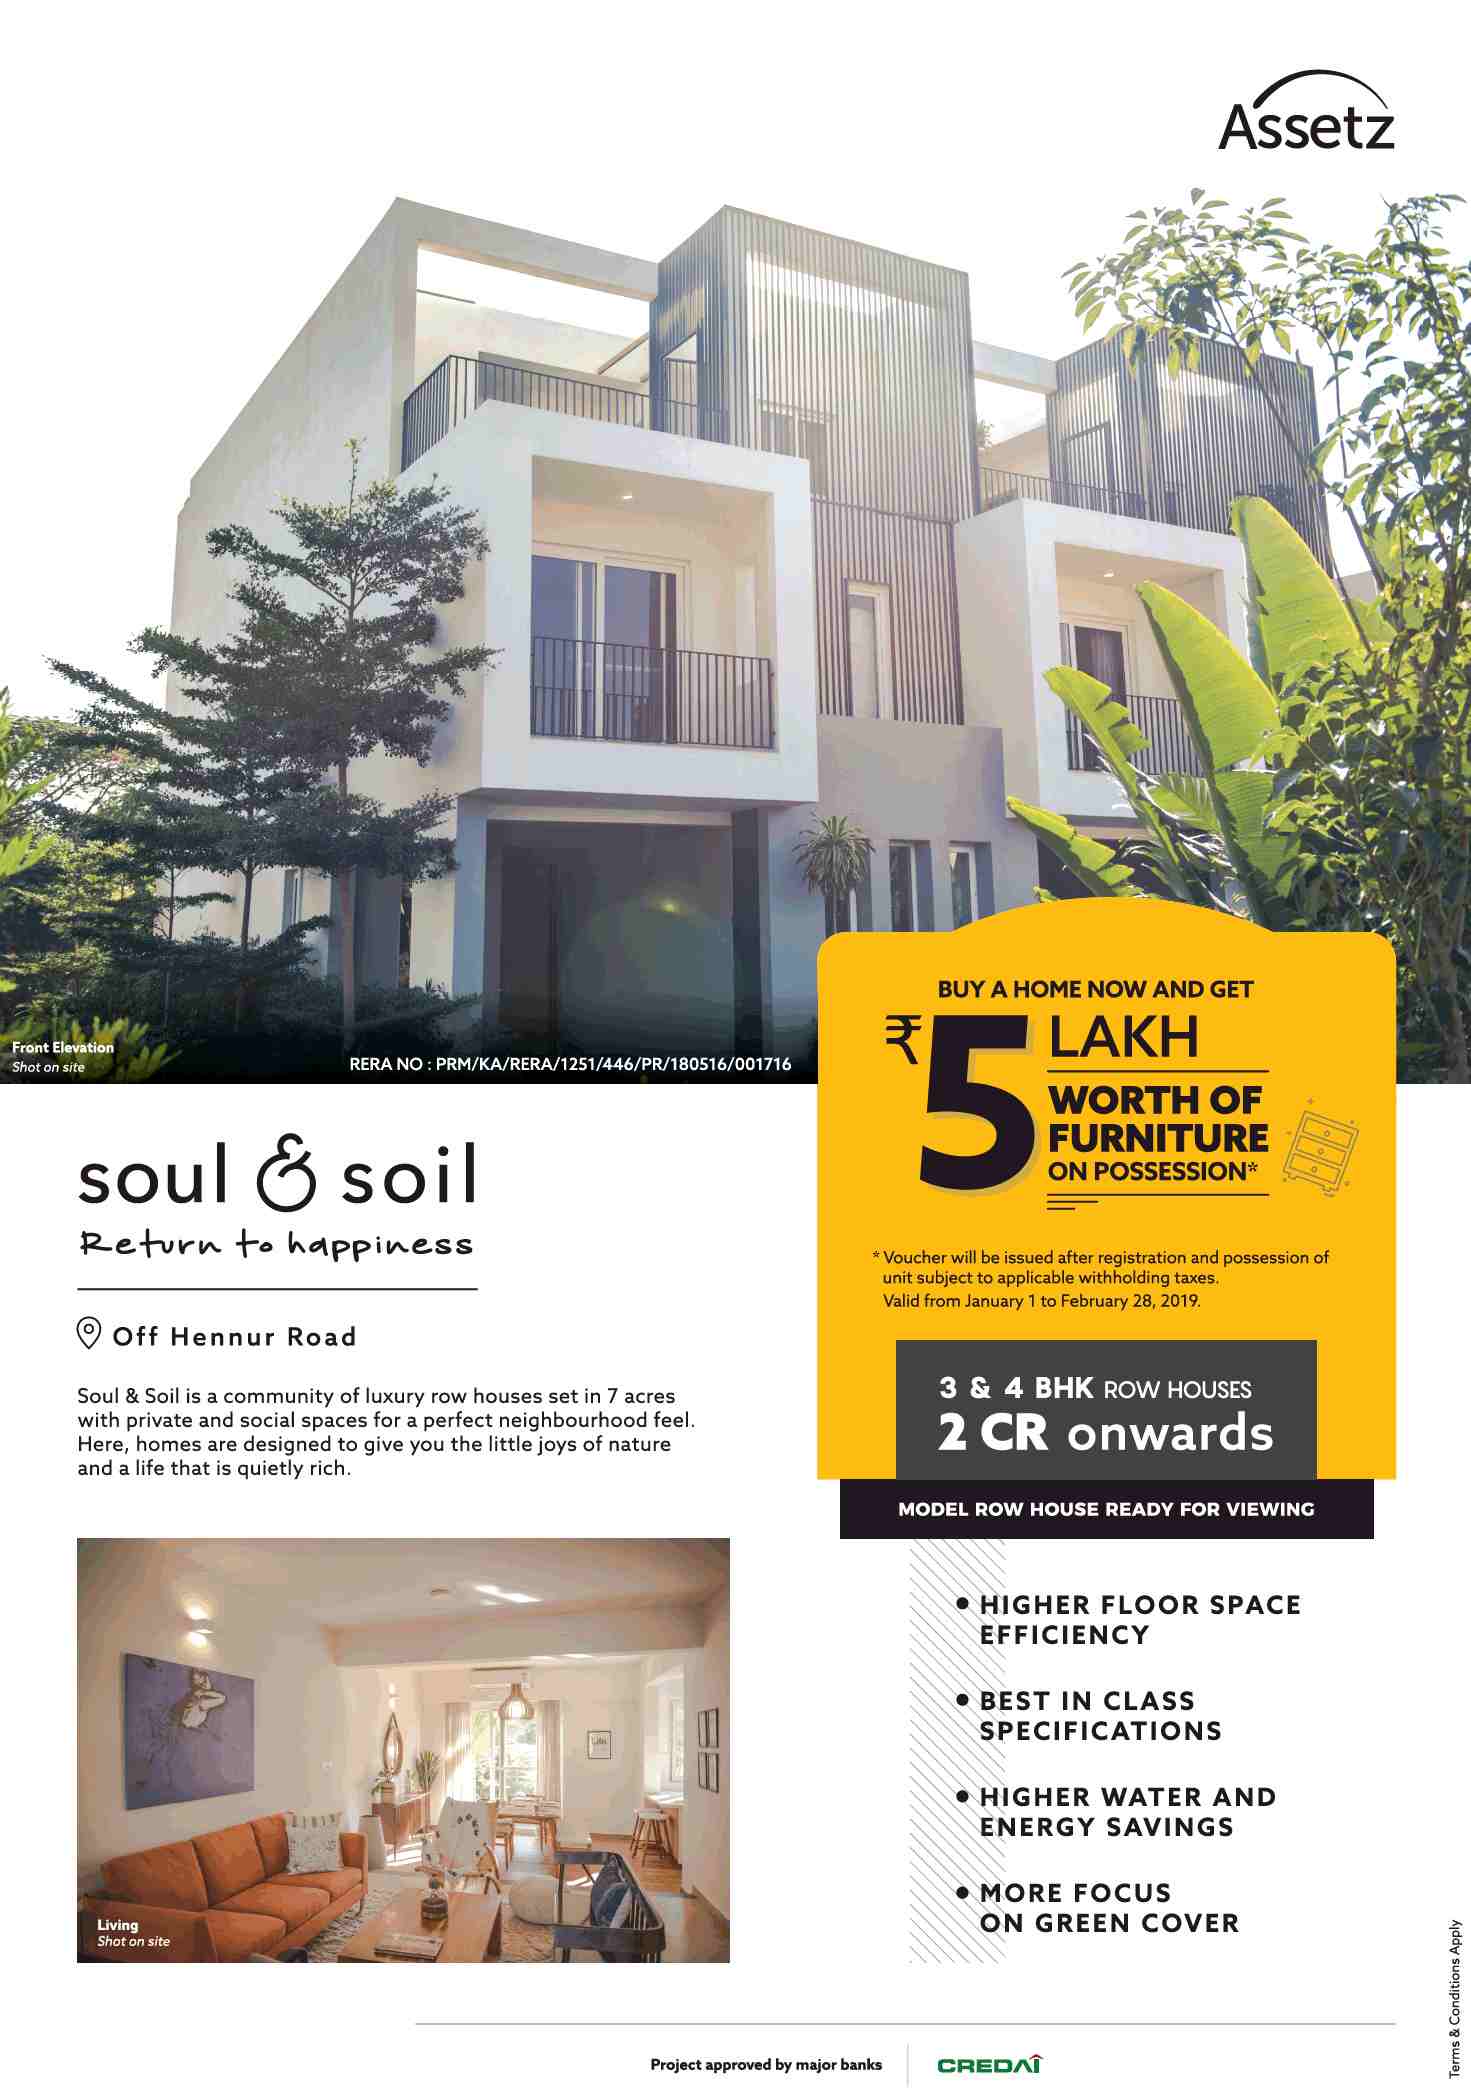 Buy a home now & get Rs 5 Lakh worth of furniture on possession at Assetz Soul & Soil in Bangalore Update